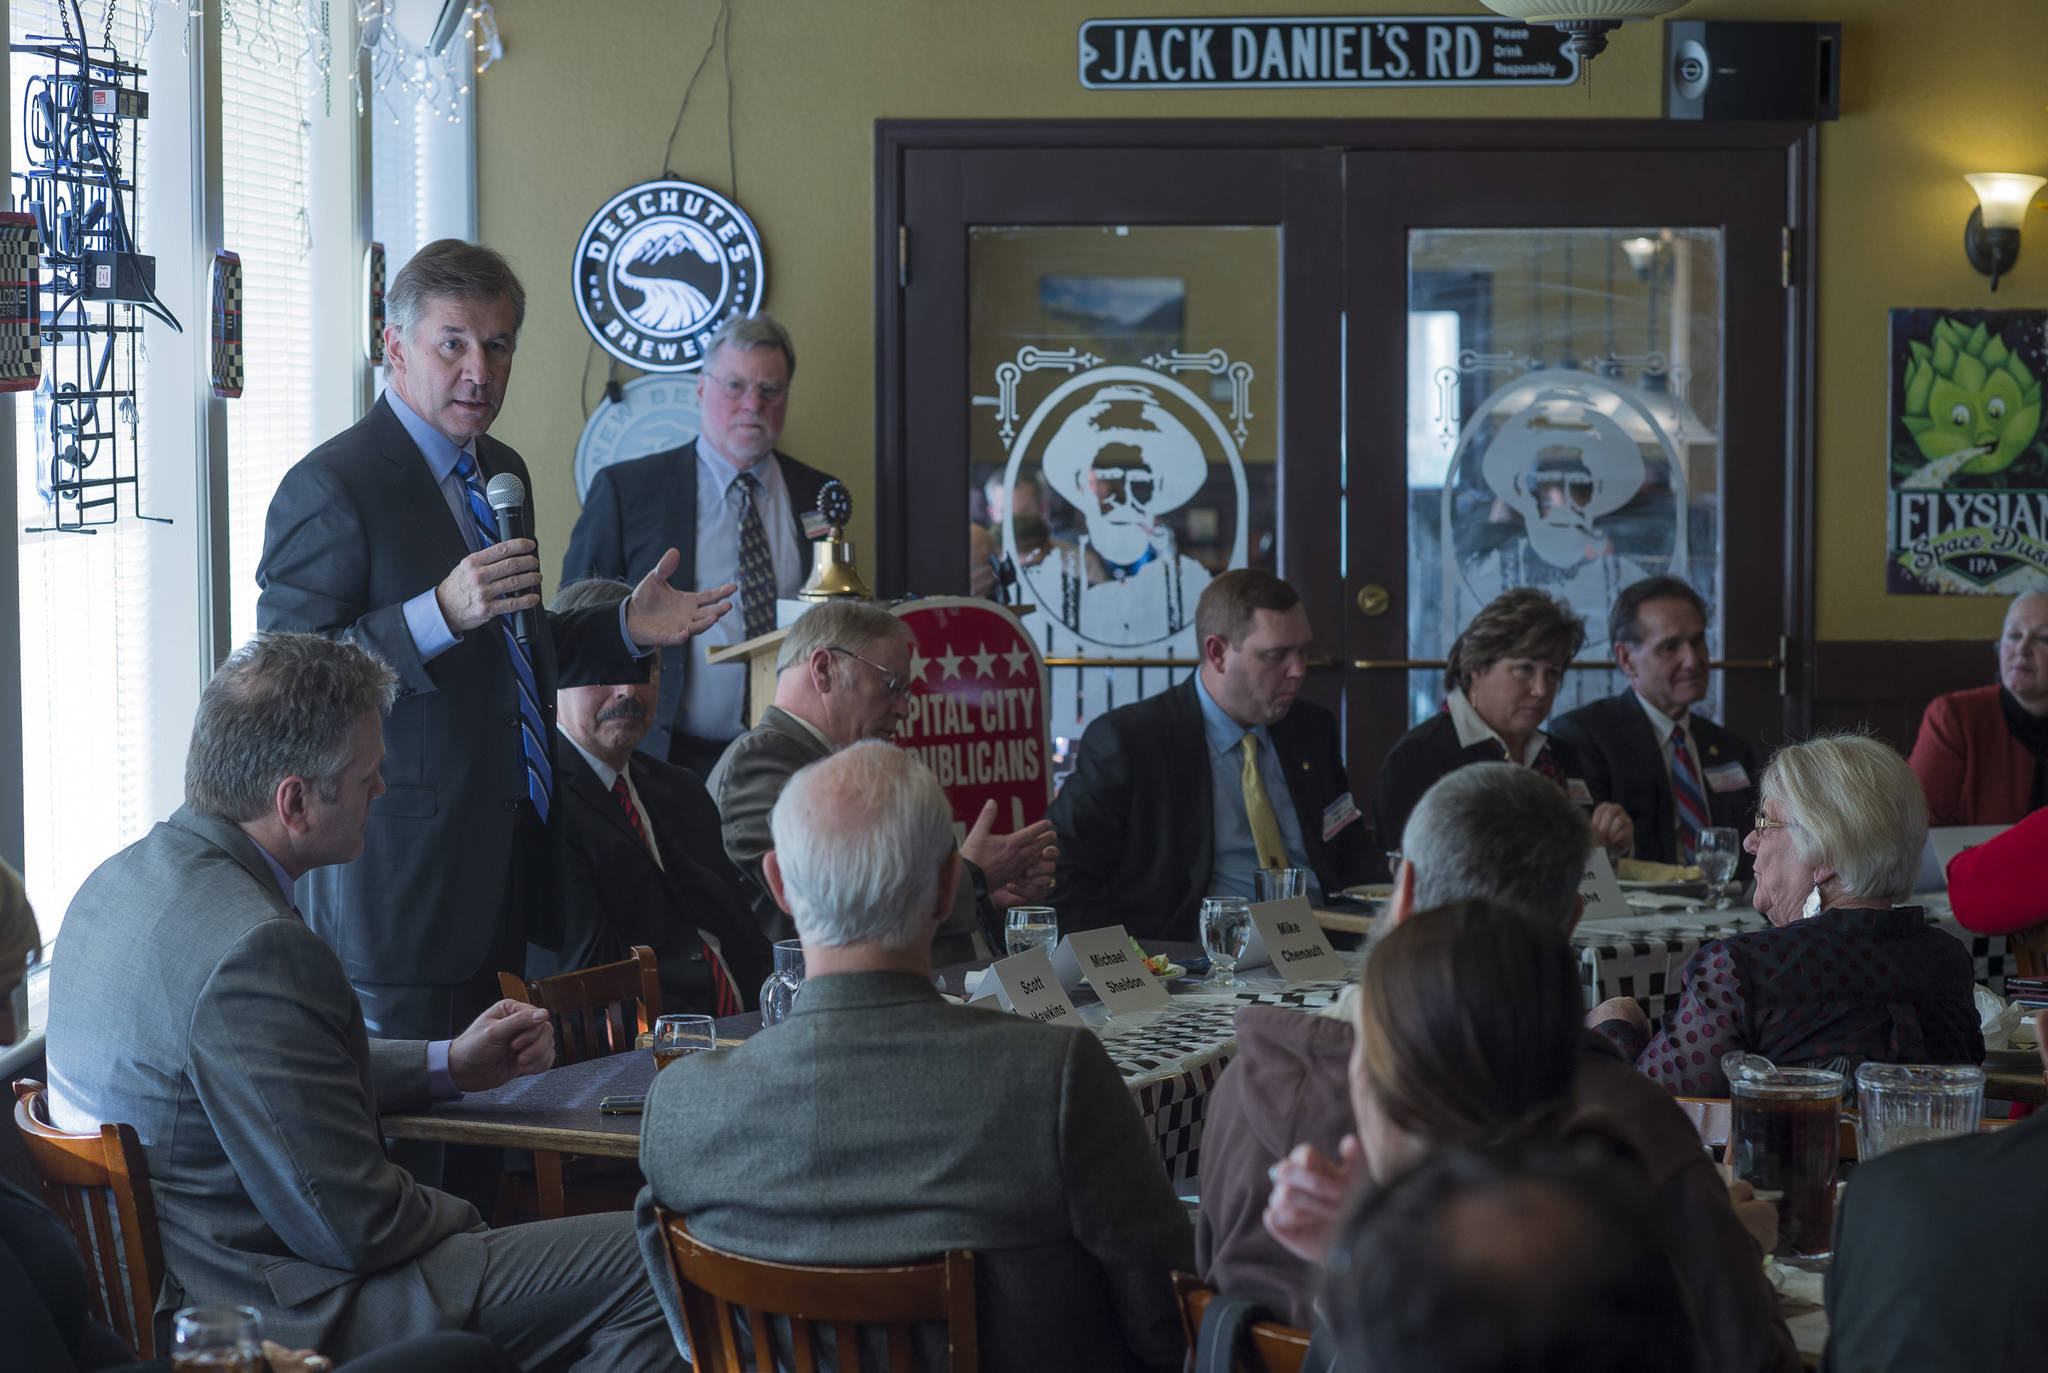 Governor candidate Scott Hawkins delivers his introduction during a GOP candidate forum at the Prospector Hotel on Friday, Jan. 26, 2018. (Michael Penn | Juneau Empire)